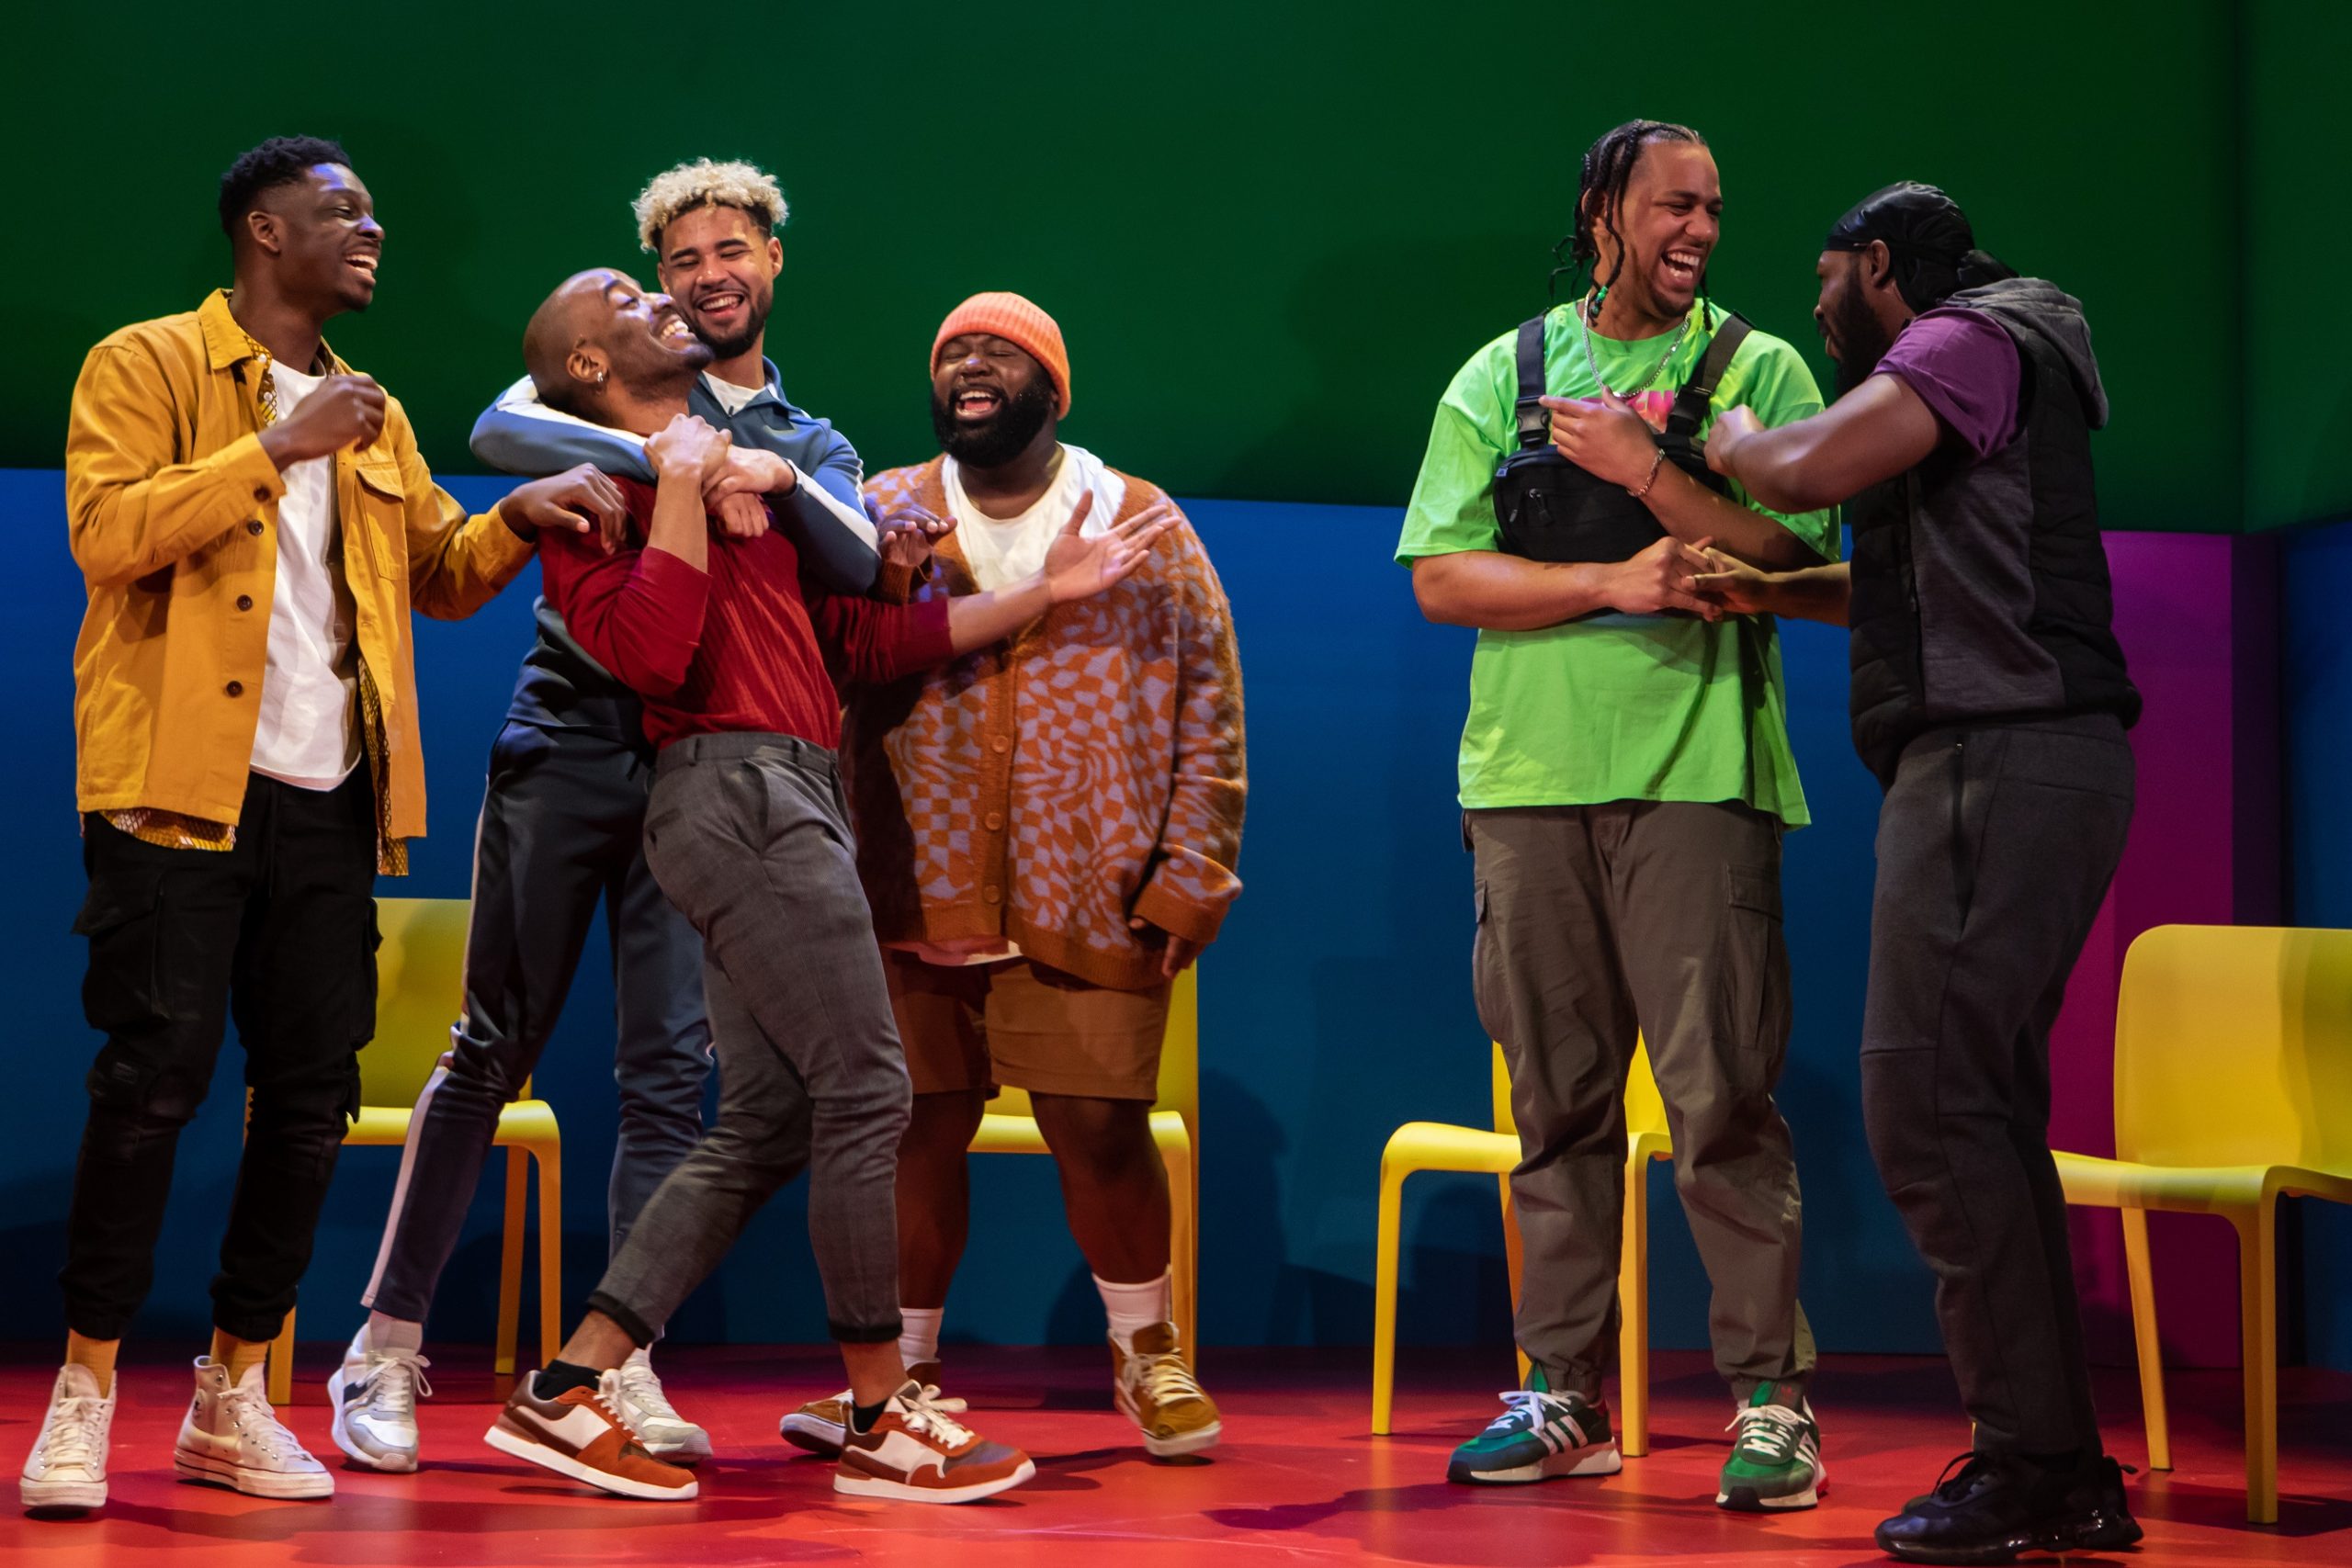 For Black Boys Who Have Considered Suicide When the Hue Gets too Heavy (Apollo Theatre) Aruna Jalloh, Nnabiko Ejimofor, Darragh Hand, Emmanuel Akwafo, Kaine Lawrence, and Mark Akintimehin(c) Ali Wright